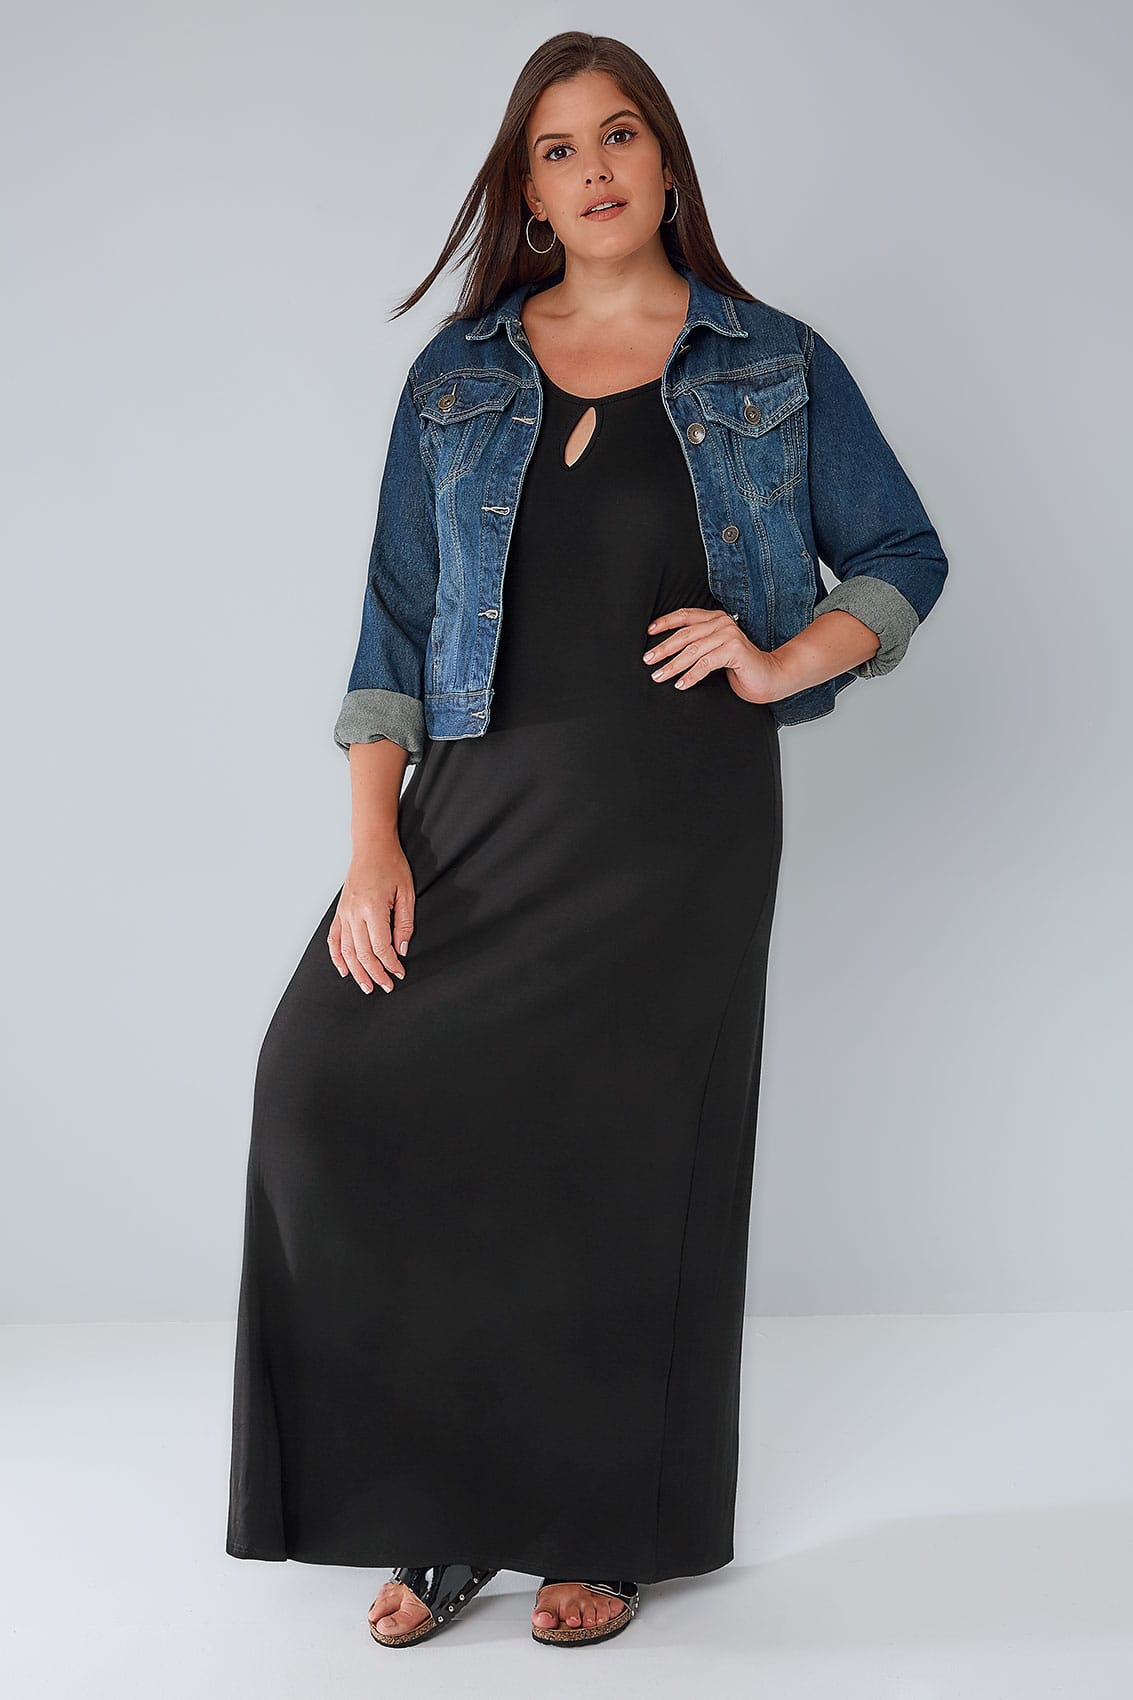 Black Jersey Maxi Dress With Keyhole Detail, Plus size 16 to 36